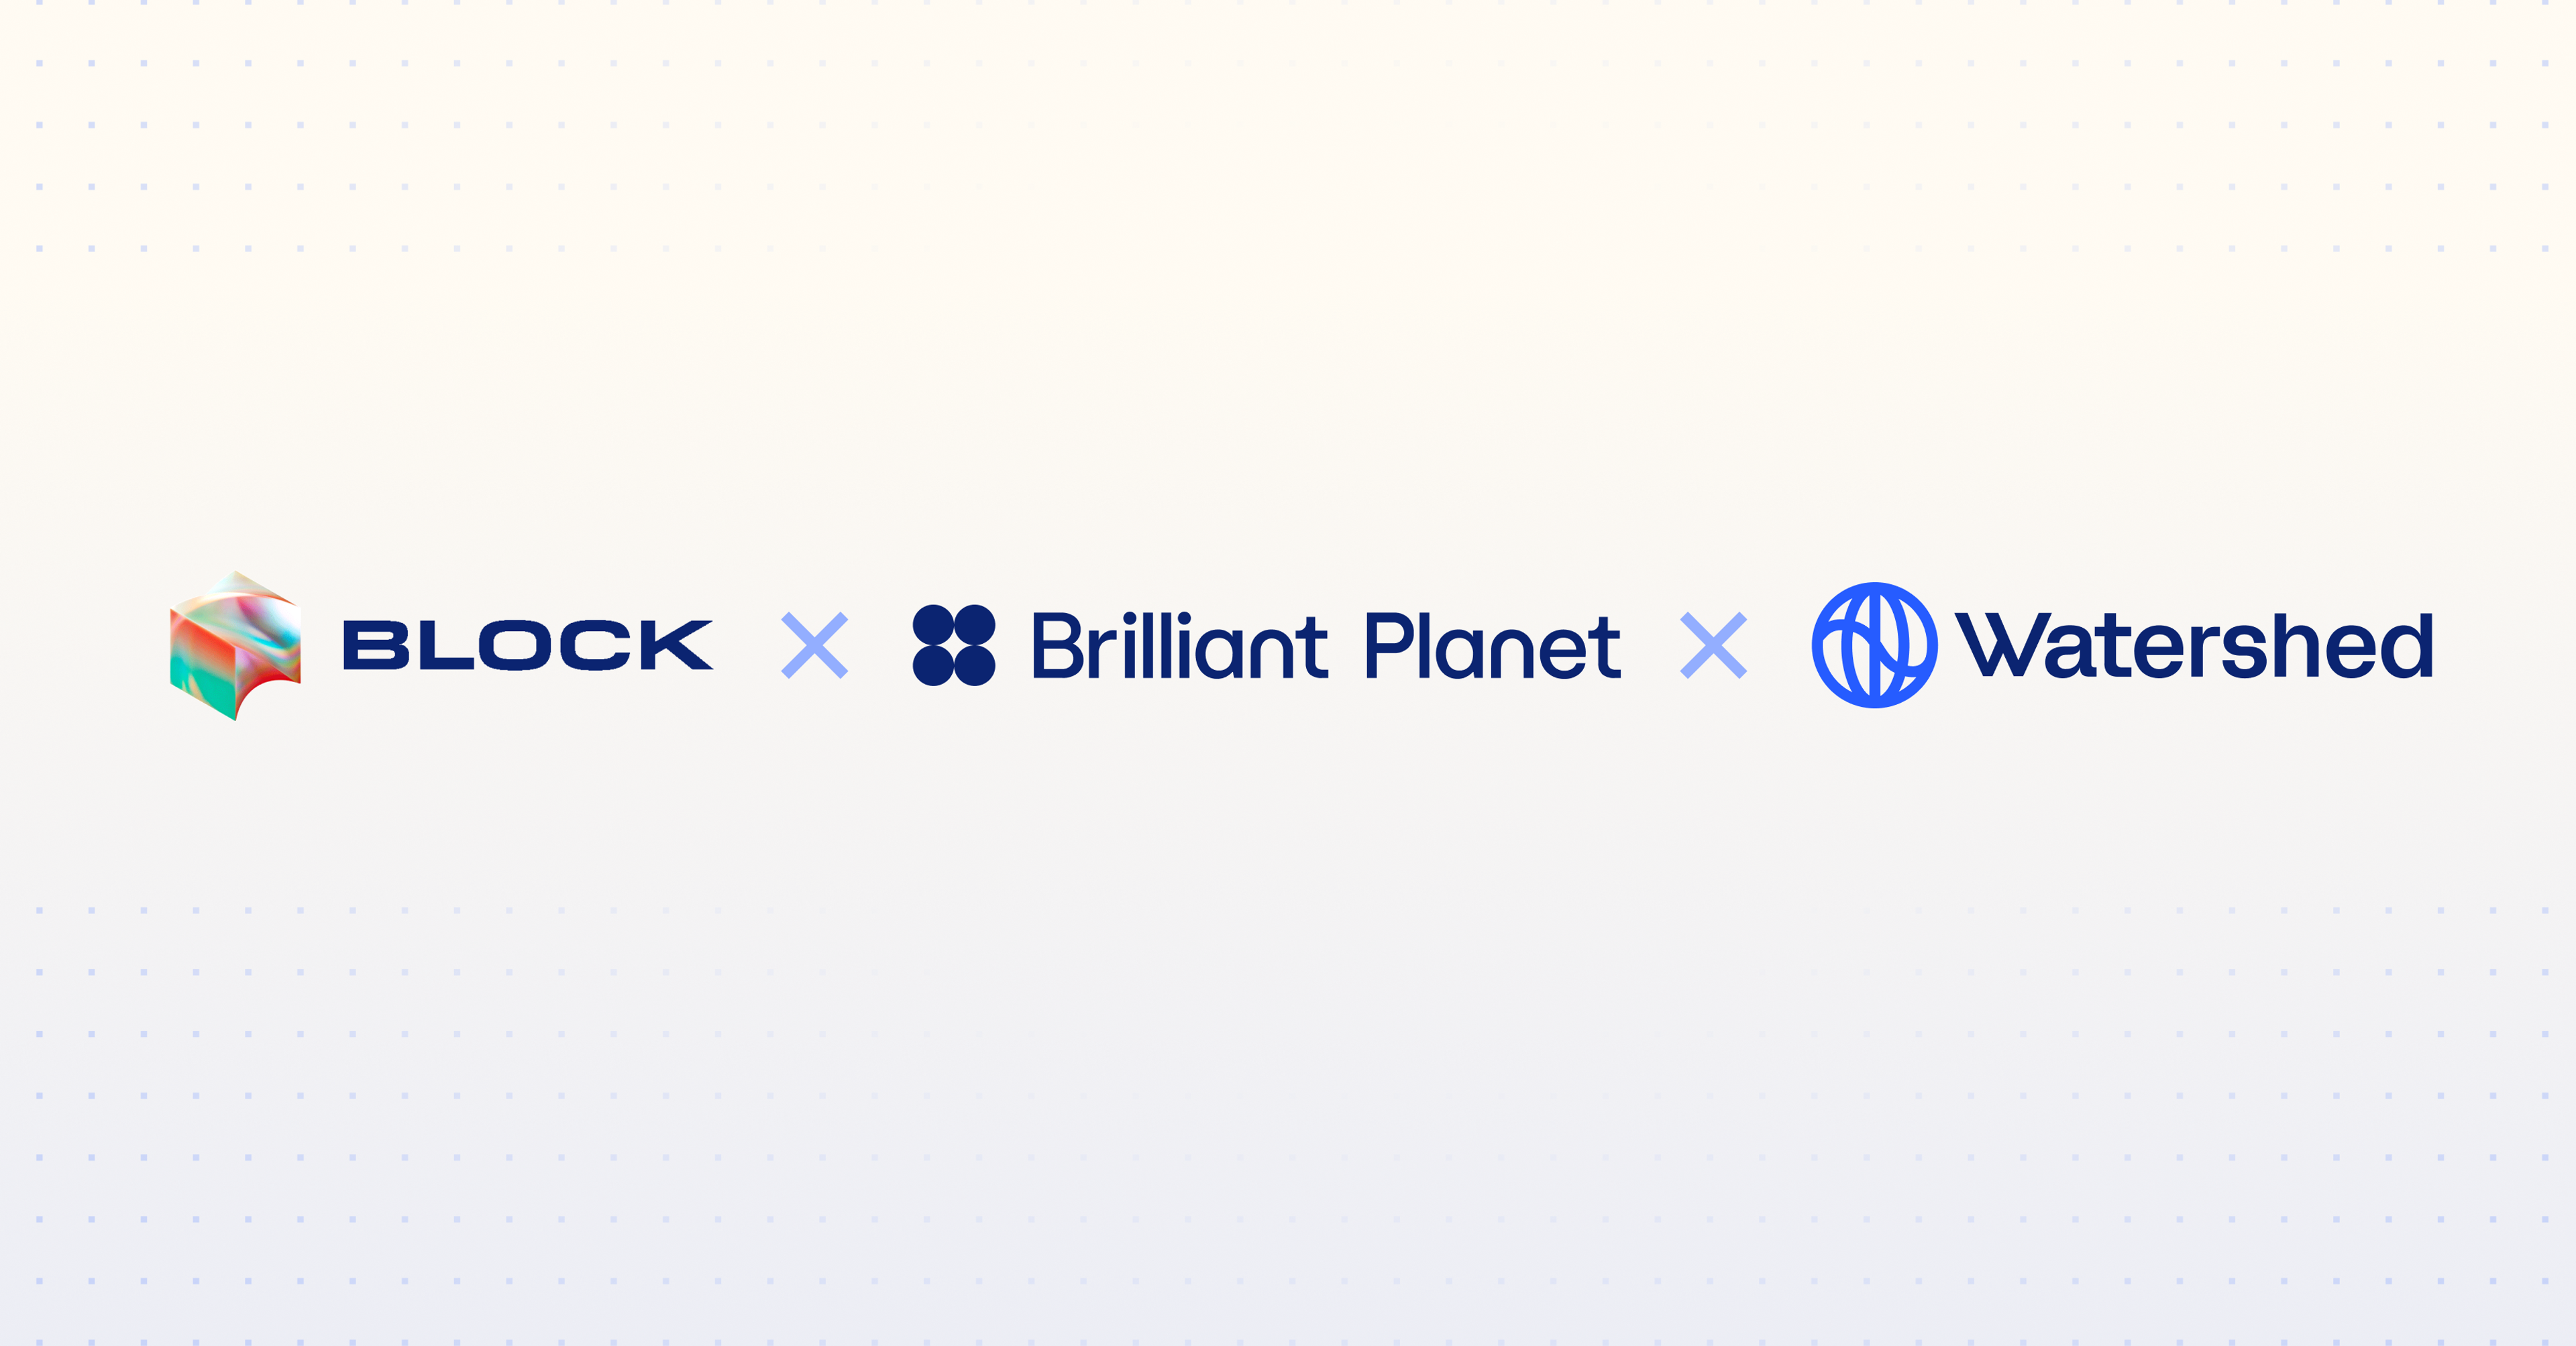 Block, Brilliant Planet, and Watershed logos